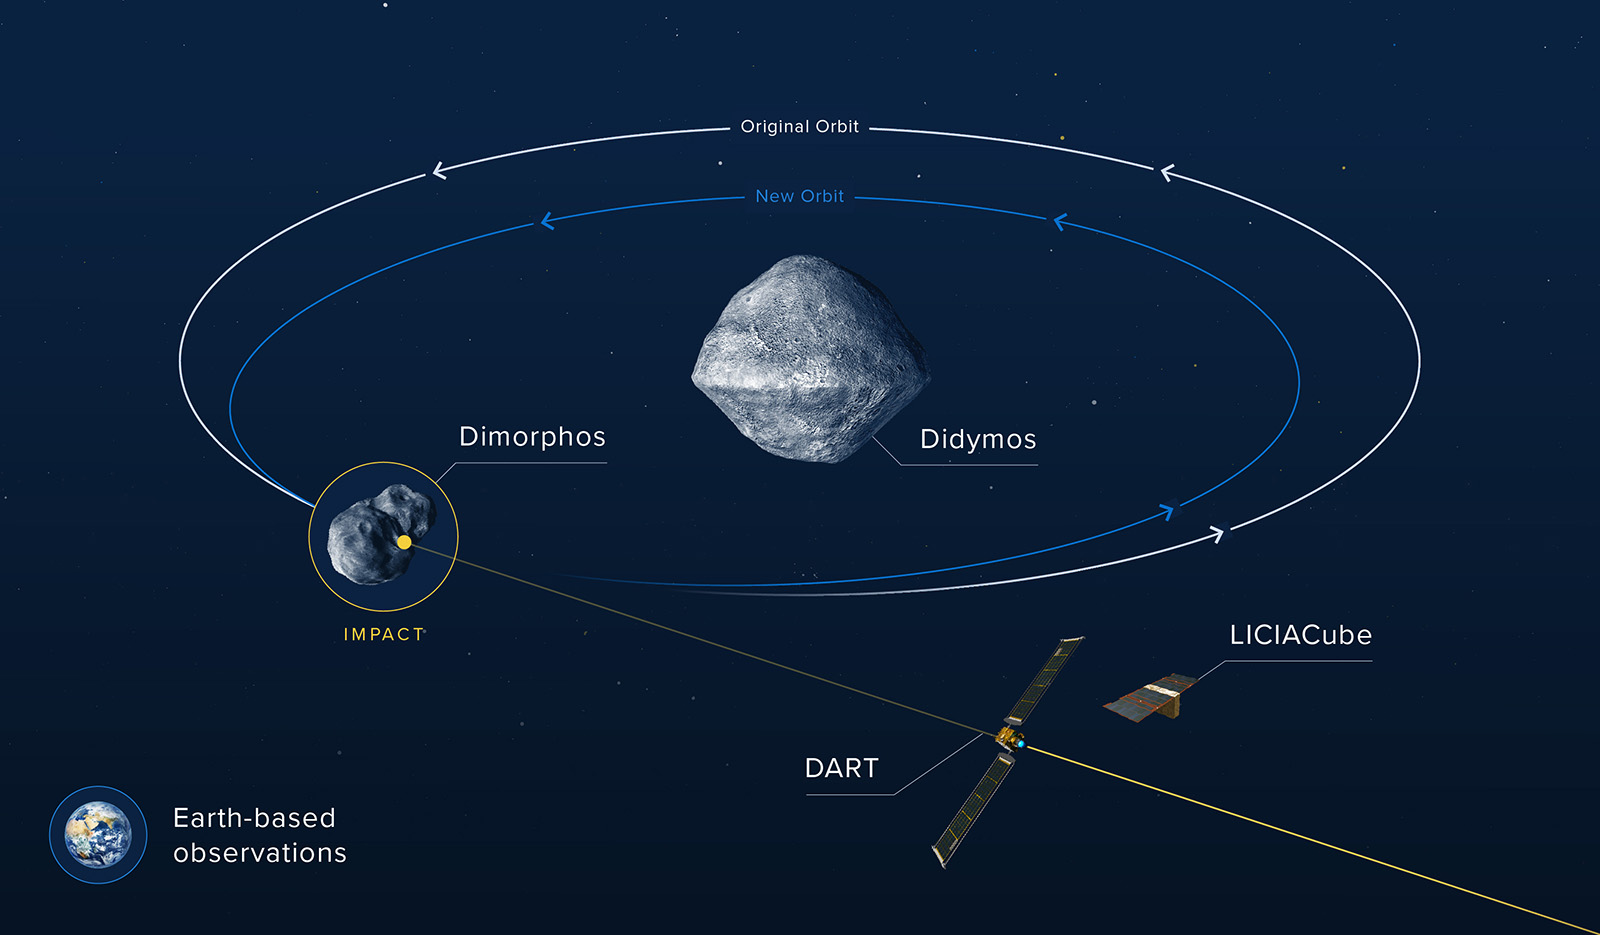 A diagram (not to scale) of the DART mission traces the original and post-deflection (smaller-radius) elliptical orbital paths of Dimorphos around Didymos). The spacecraft is positioned as heading in a straight path toward impact in the center of Dimorphis. The DART spacecraft has apparently just released LICIACube before intersecting Dimorphis's orbital path. Also represented is a faraway Earth, which is a base for telescope observation of the impact.